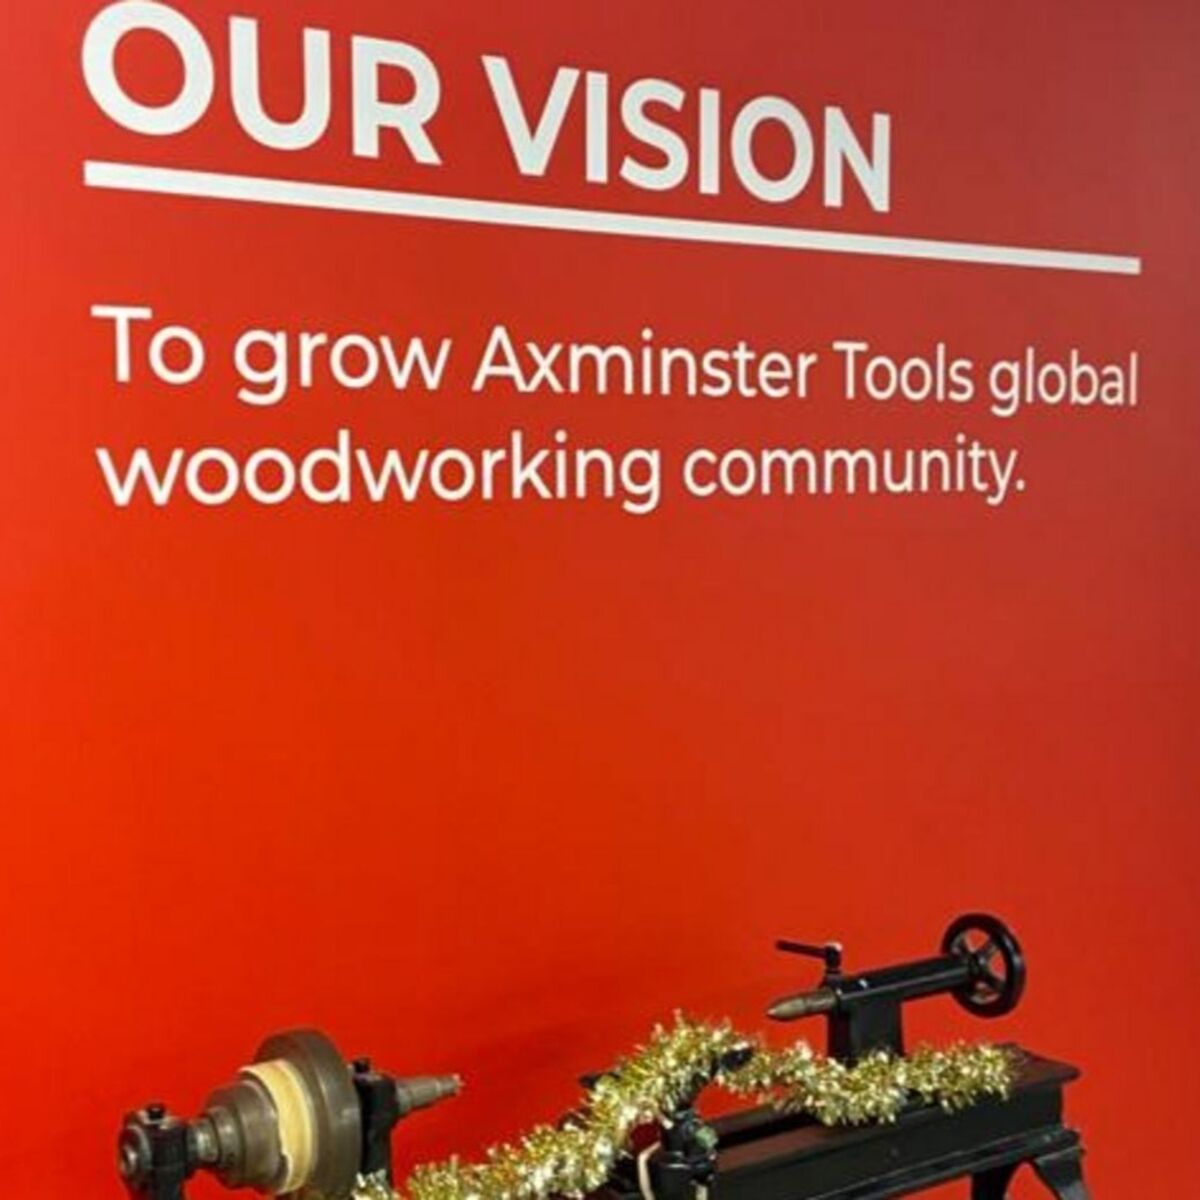 vision-statement-wall-display-for-axminster-tools.jpg